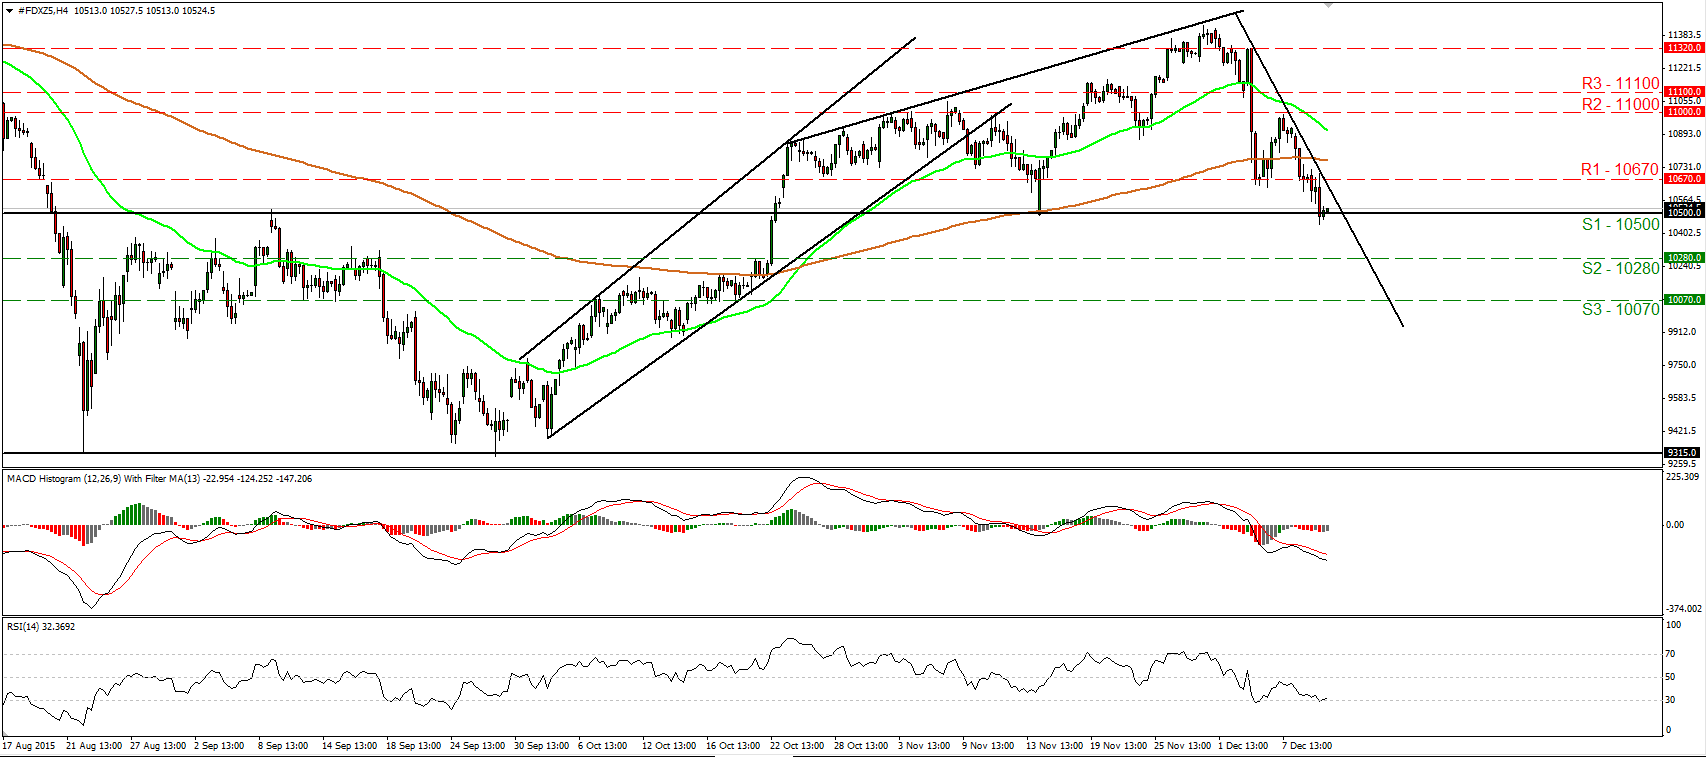 DAX Futures 4 Hourly Chart